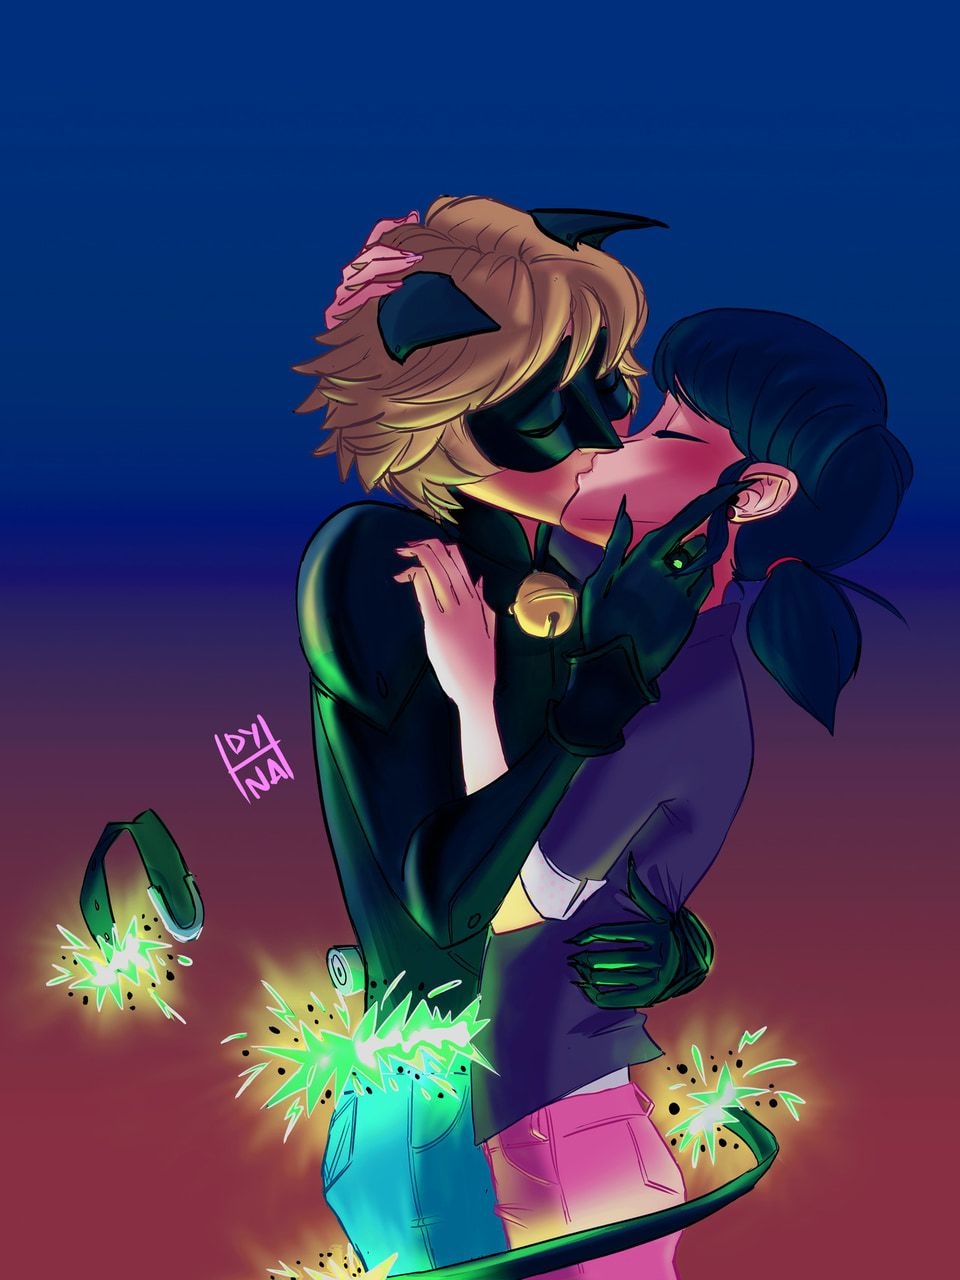 8 Images Miraculous Ladybug And Cat Noir Fanfiction Kiss And View